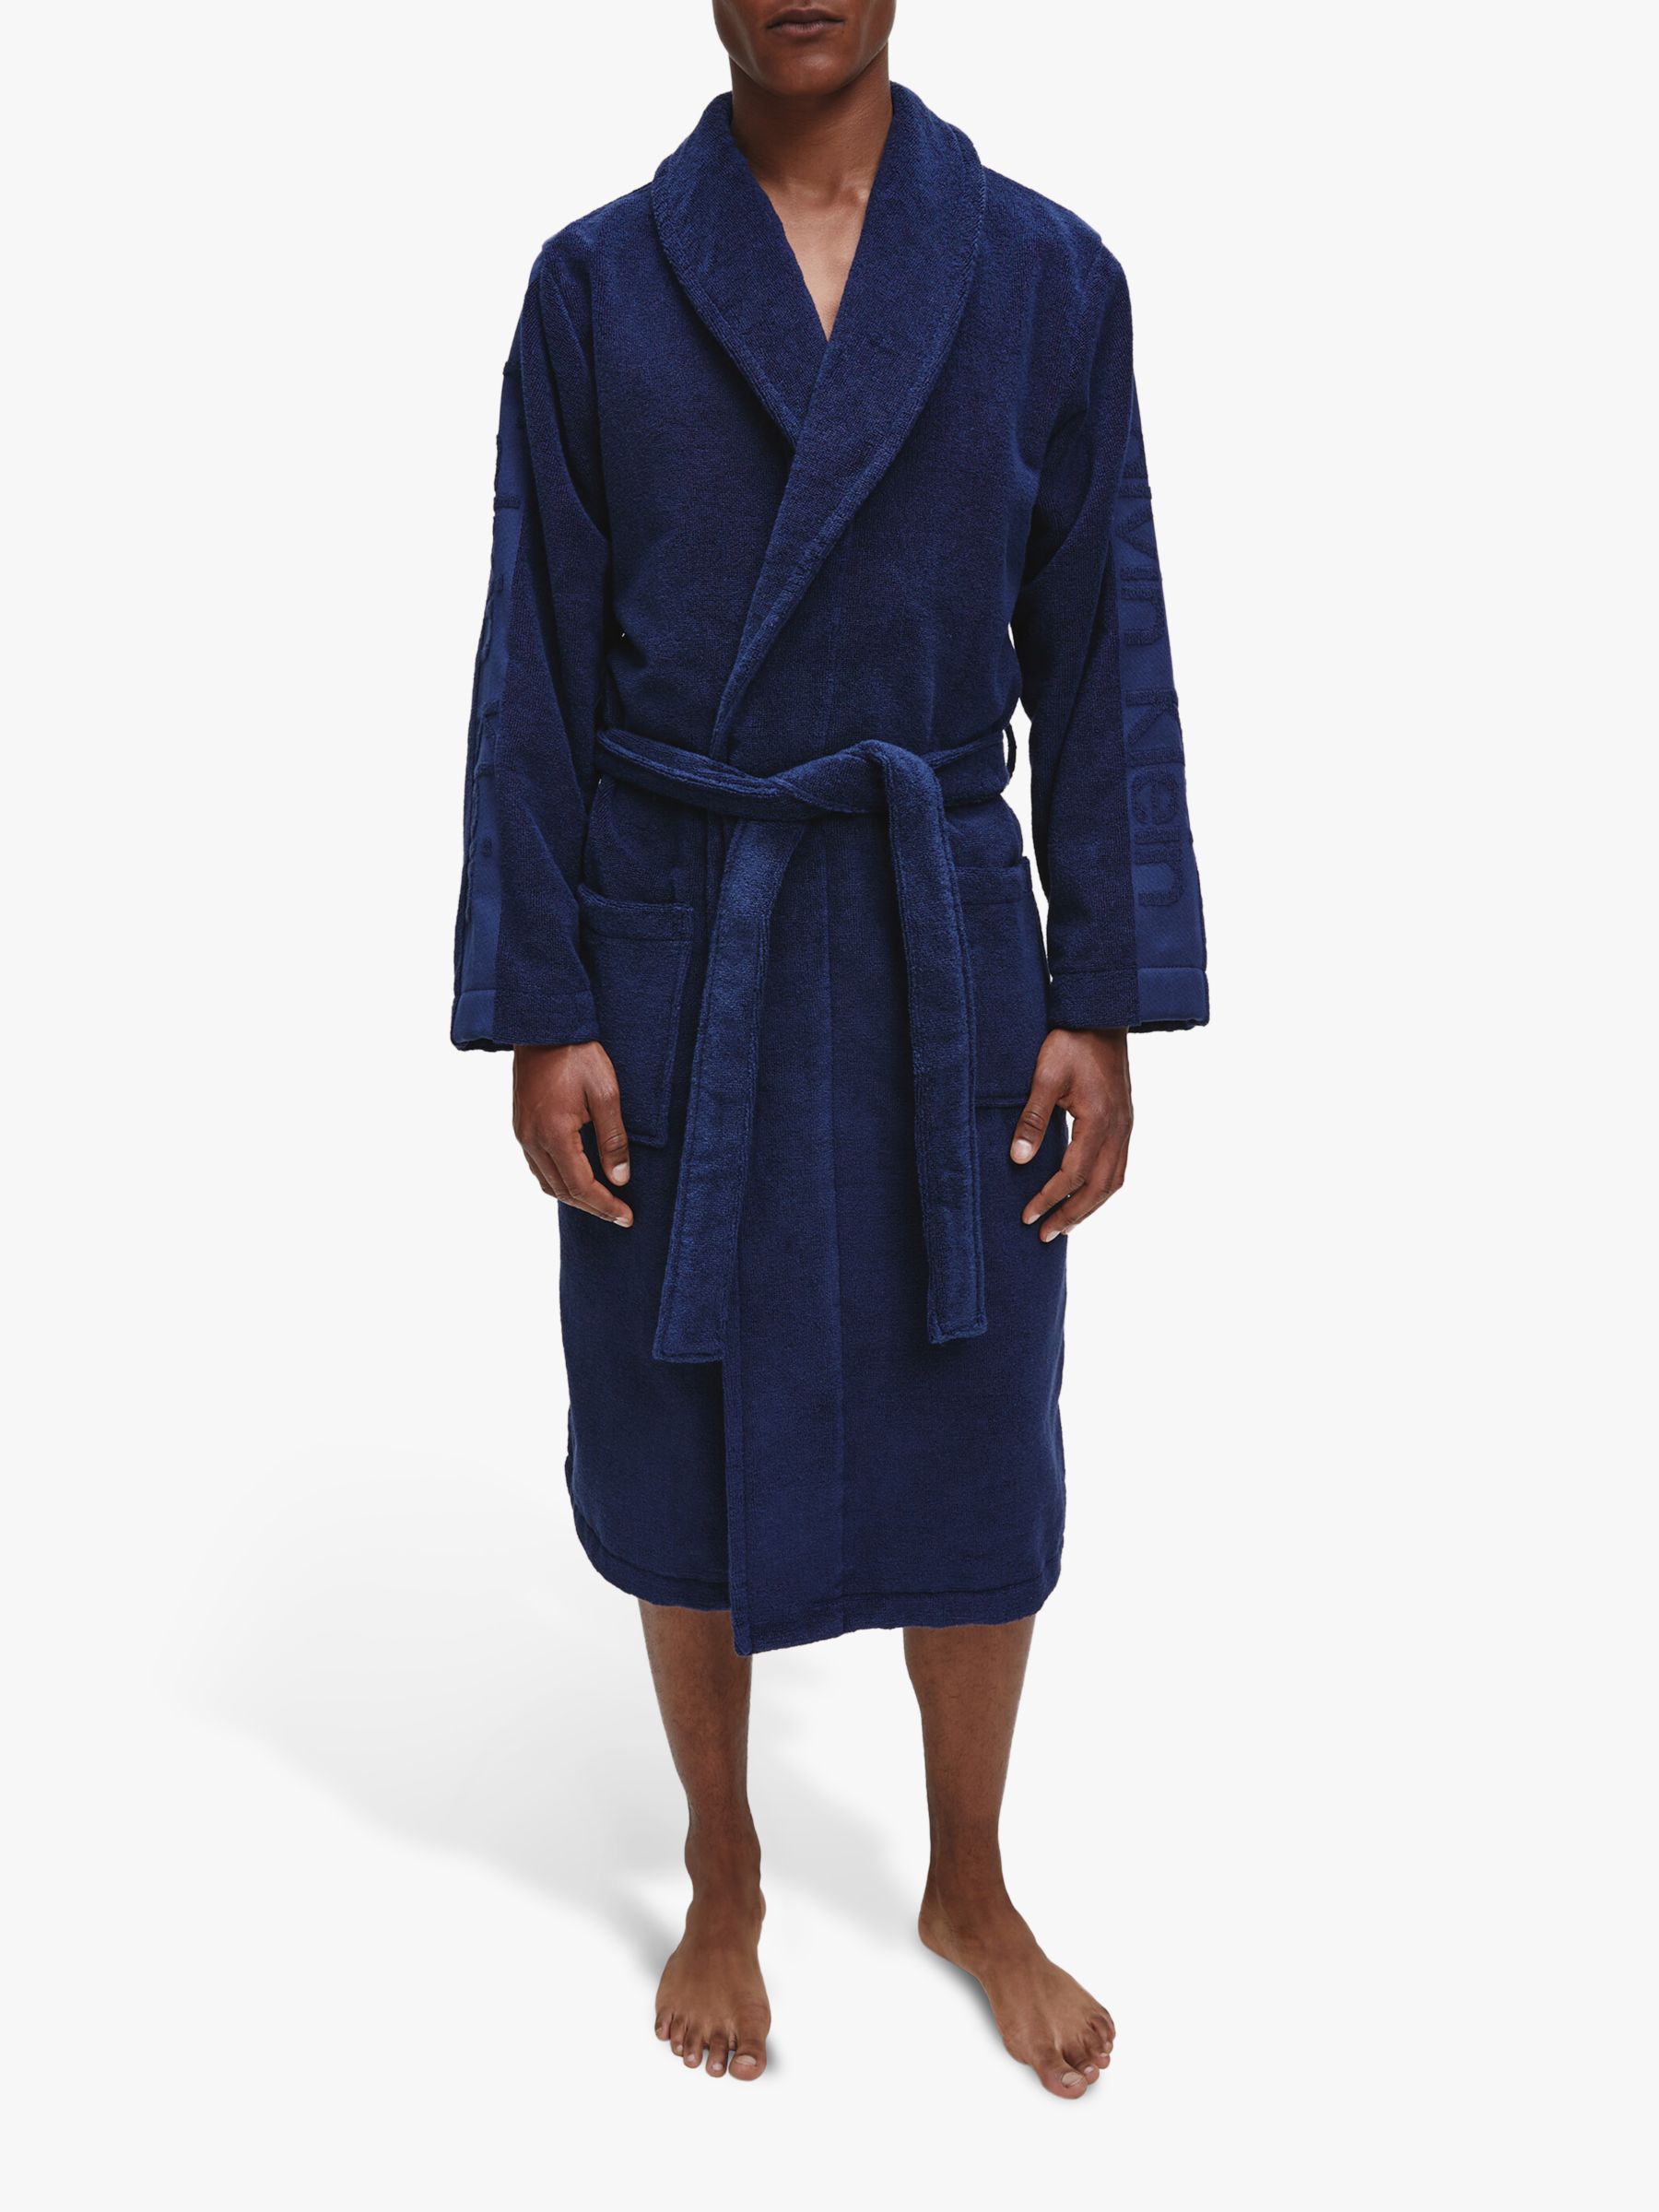 Mens Robes & Dressing Gowns | John Lewis & Partners